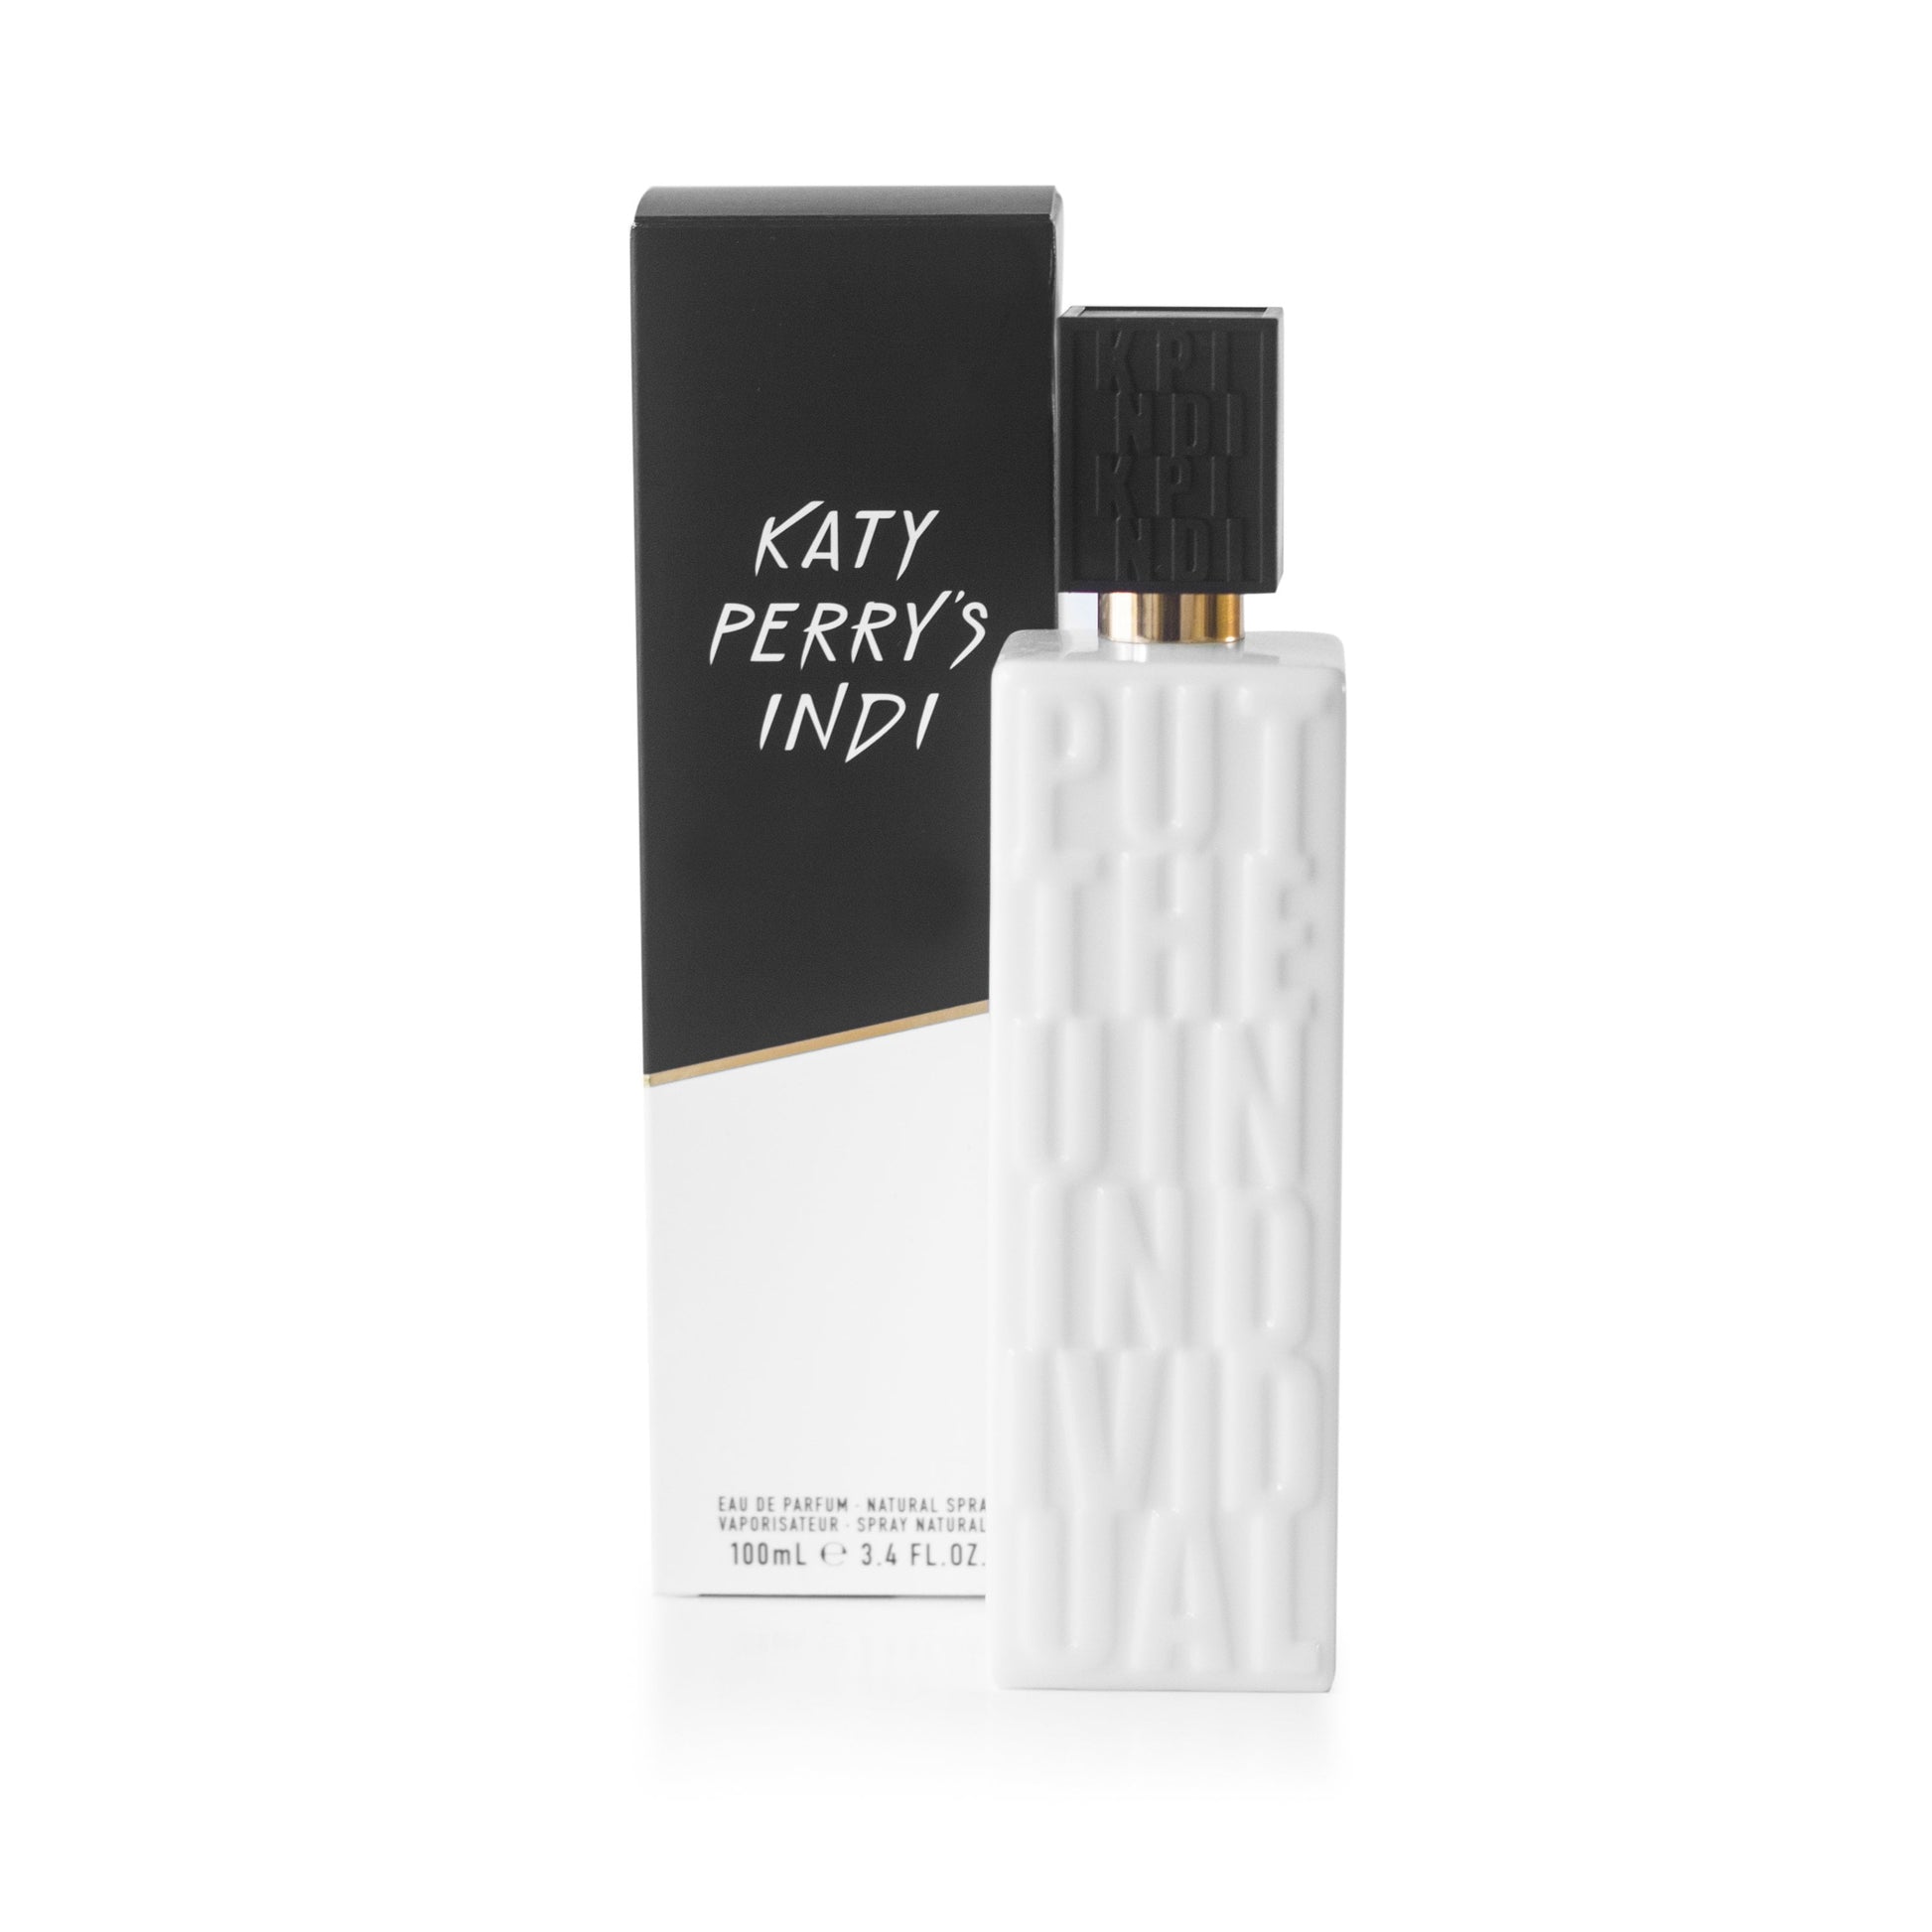 Katy Perry's Indi Eau de Parfum Spray for Women by Katy Perry, Product image 1